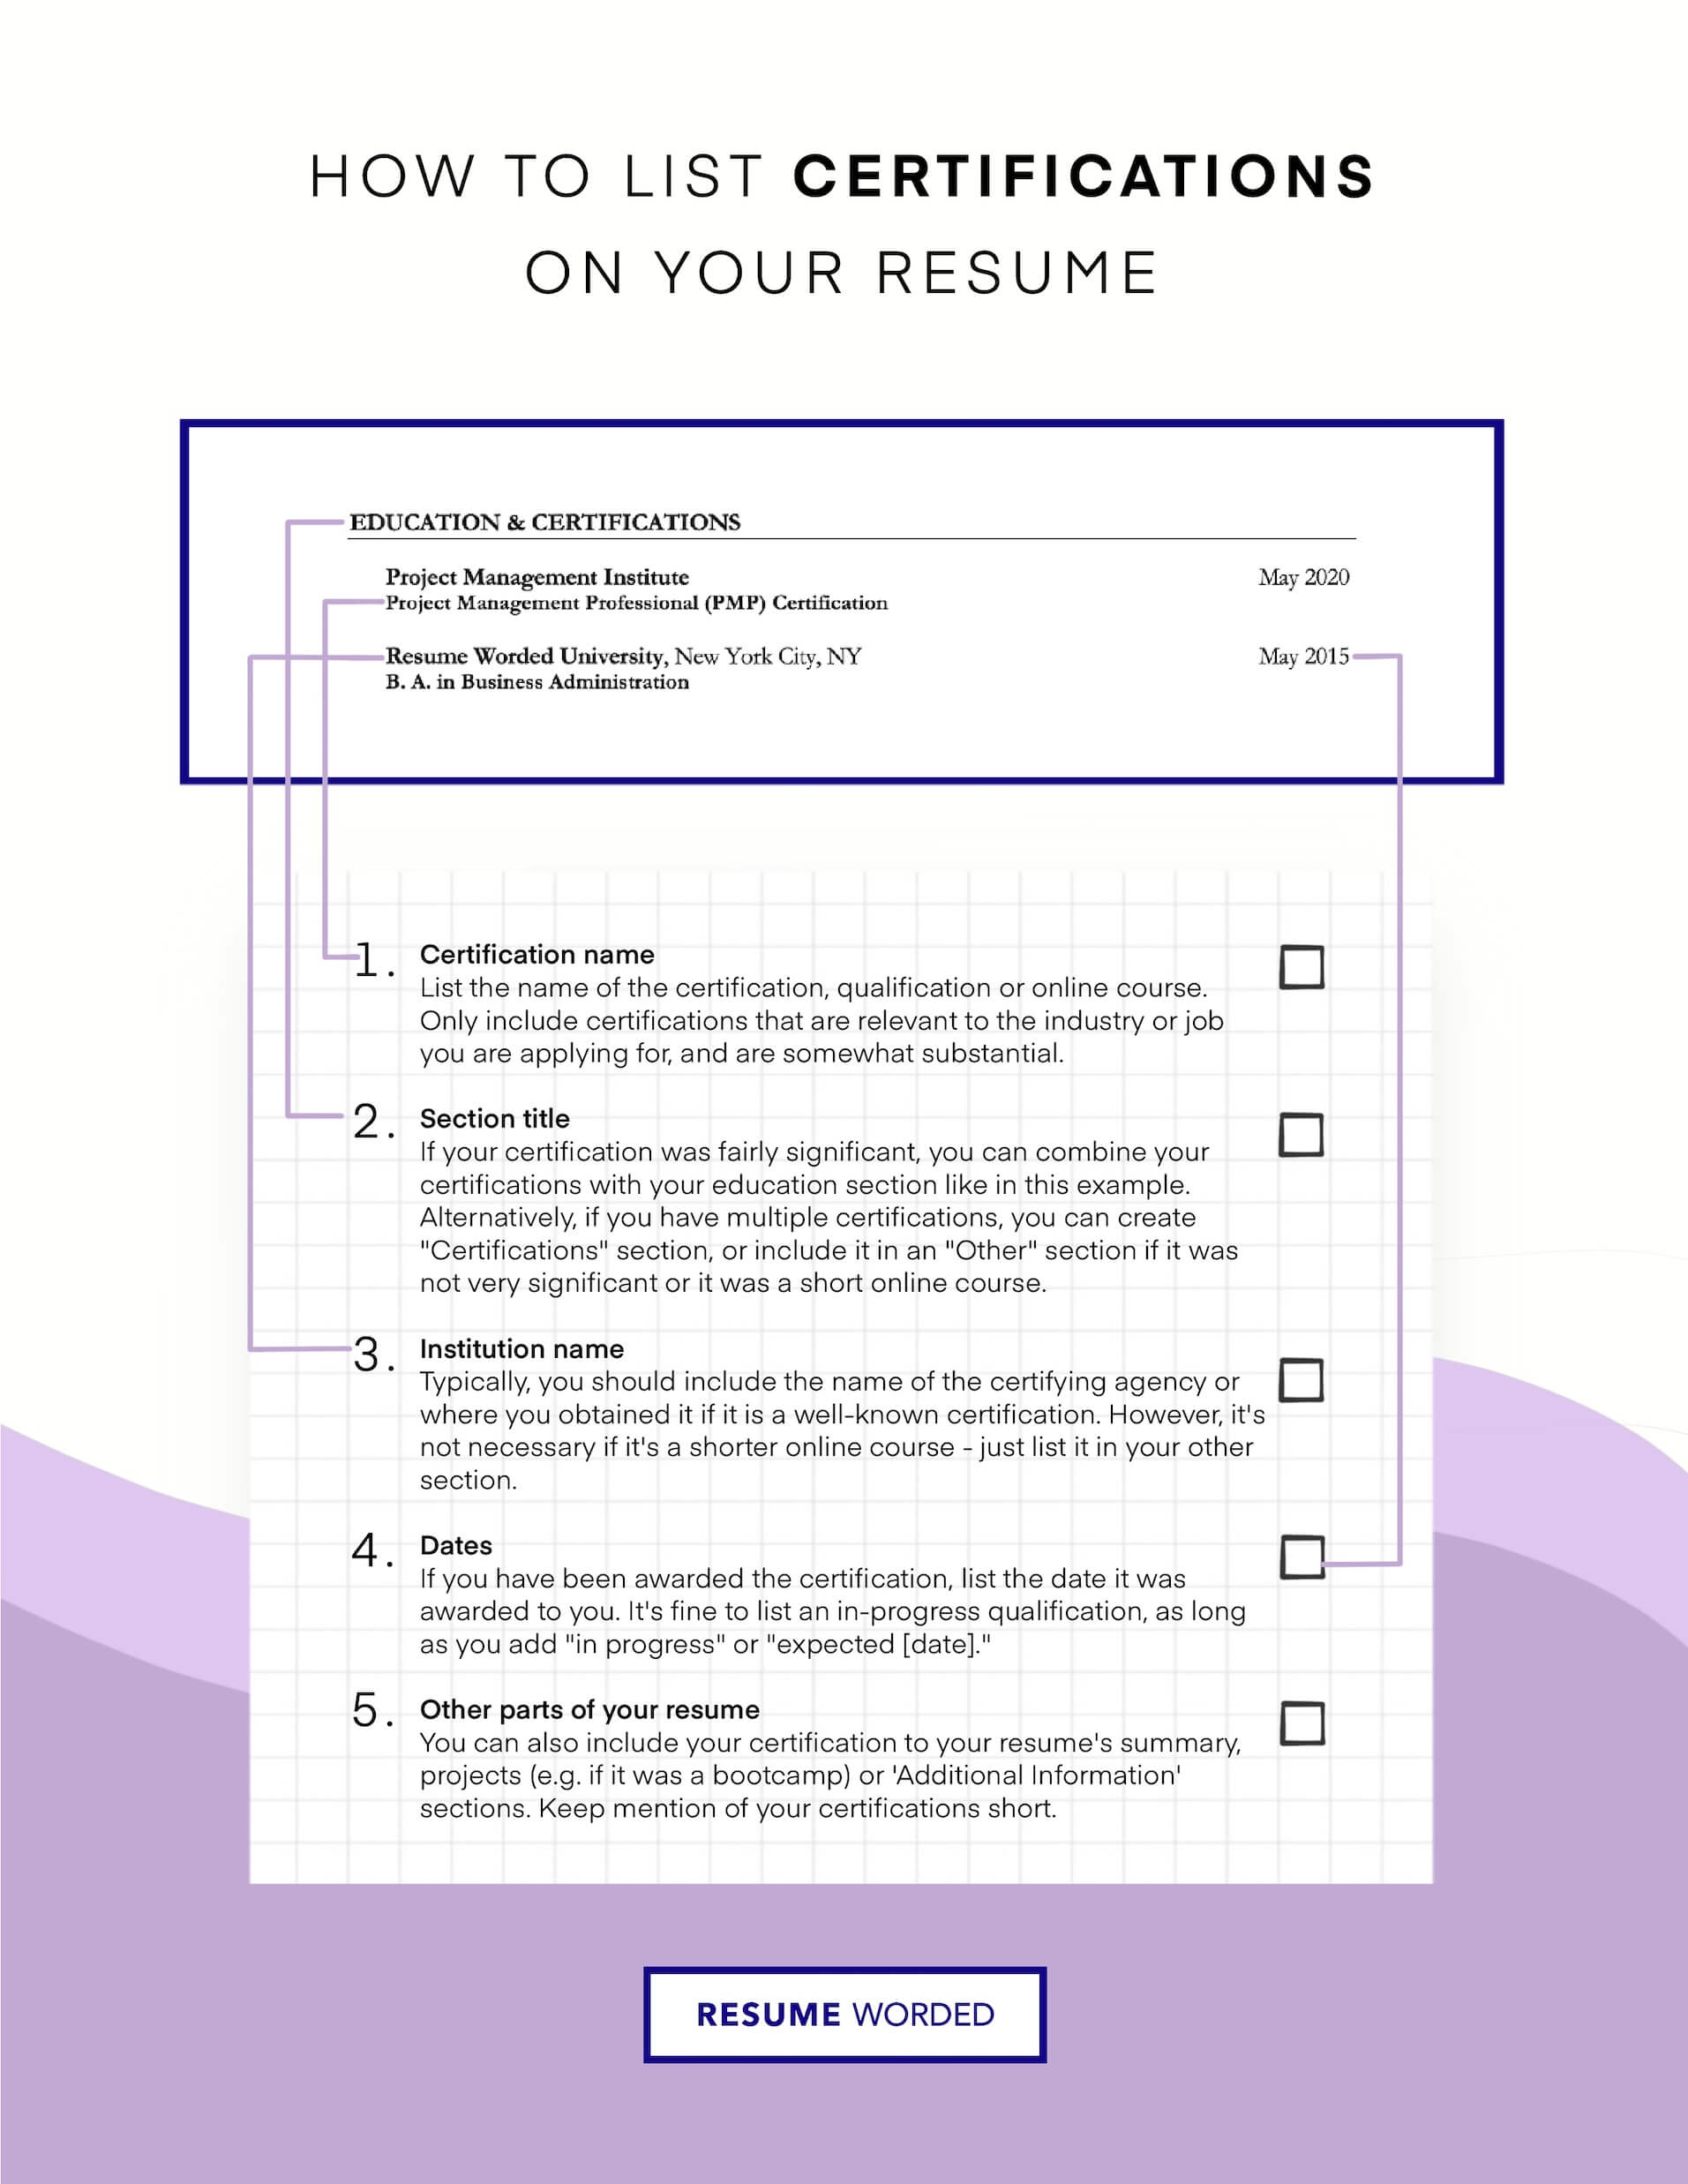 Include any healthcare industry certification. - Healthcare Data Analyst Resume